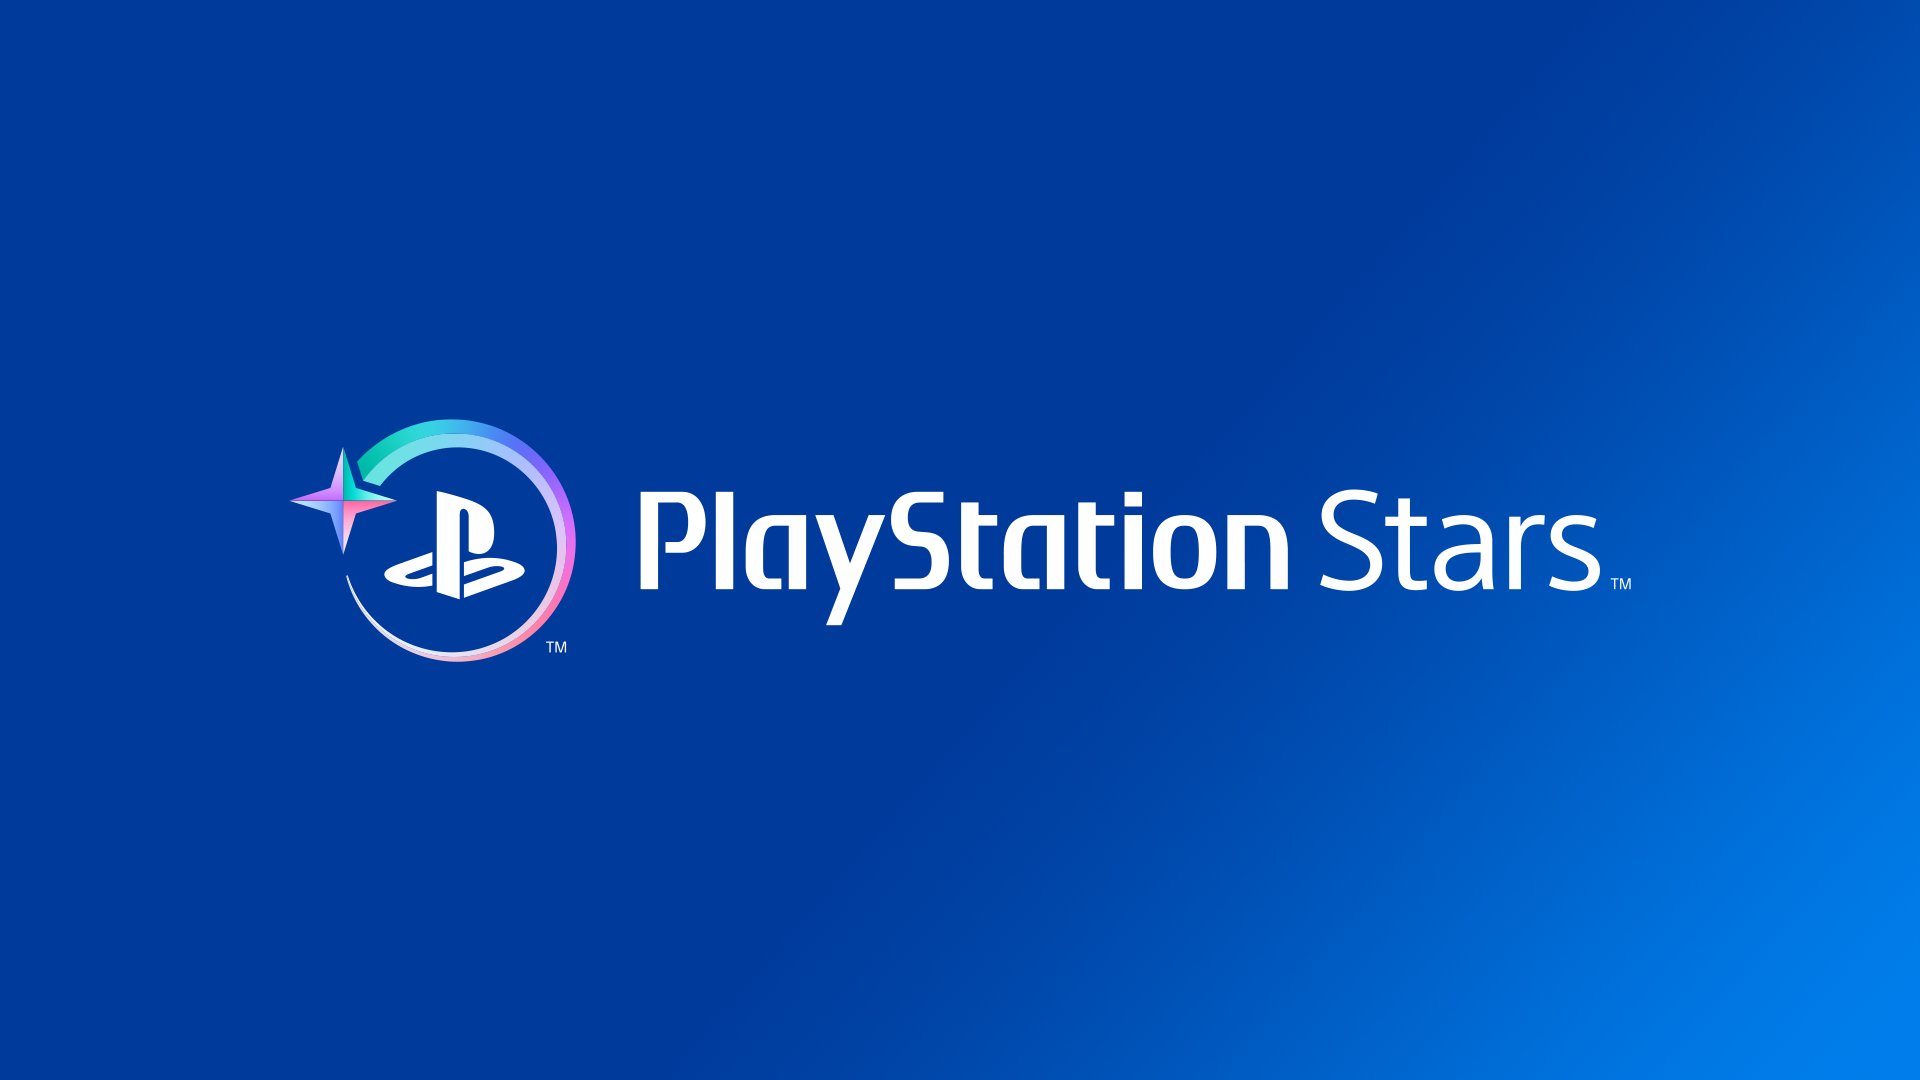 PlayStation on Twitter: "Introducing Stars, an all-new loyalty program celebrating players free to join. First details: https://t.co/0qMpStwE0N https://t.co/V7TTofX0Rb" / Twitter